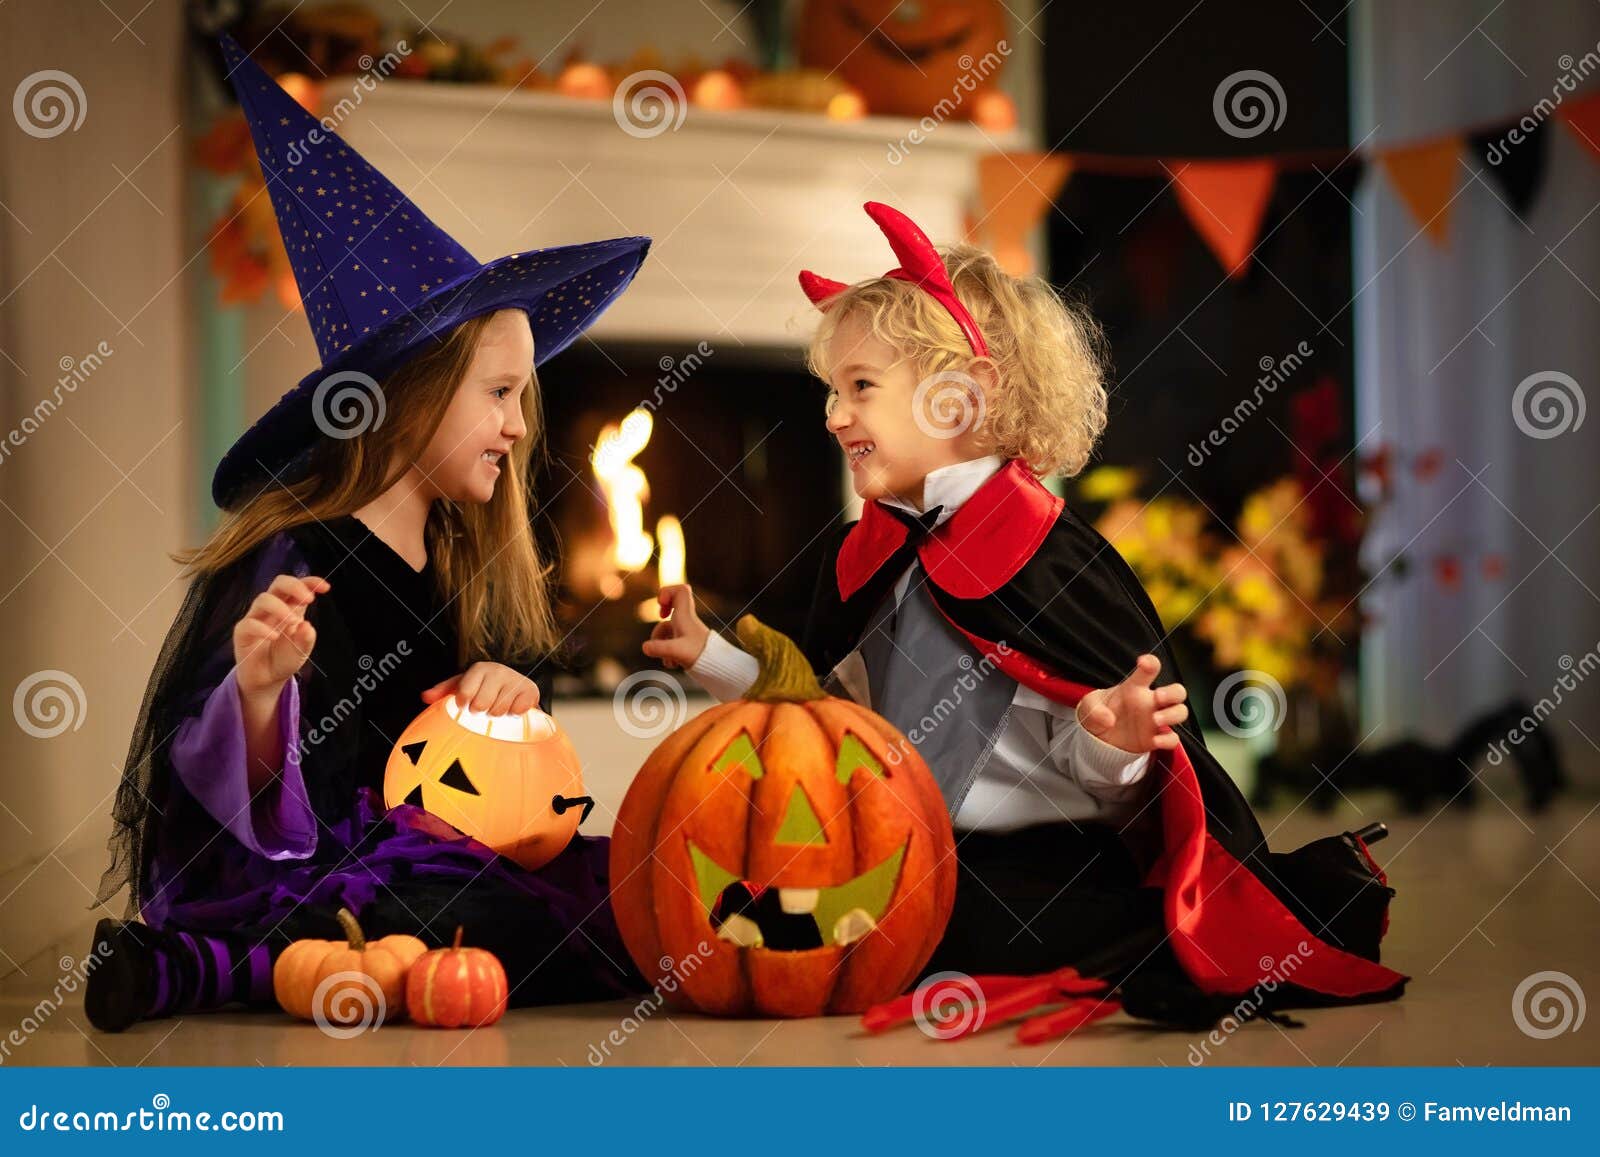 kids in witch costume on halloween trick or treat